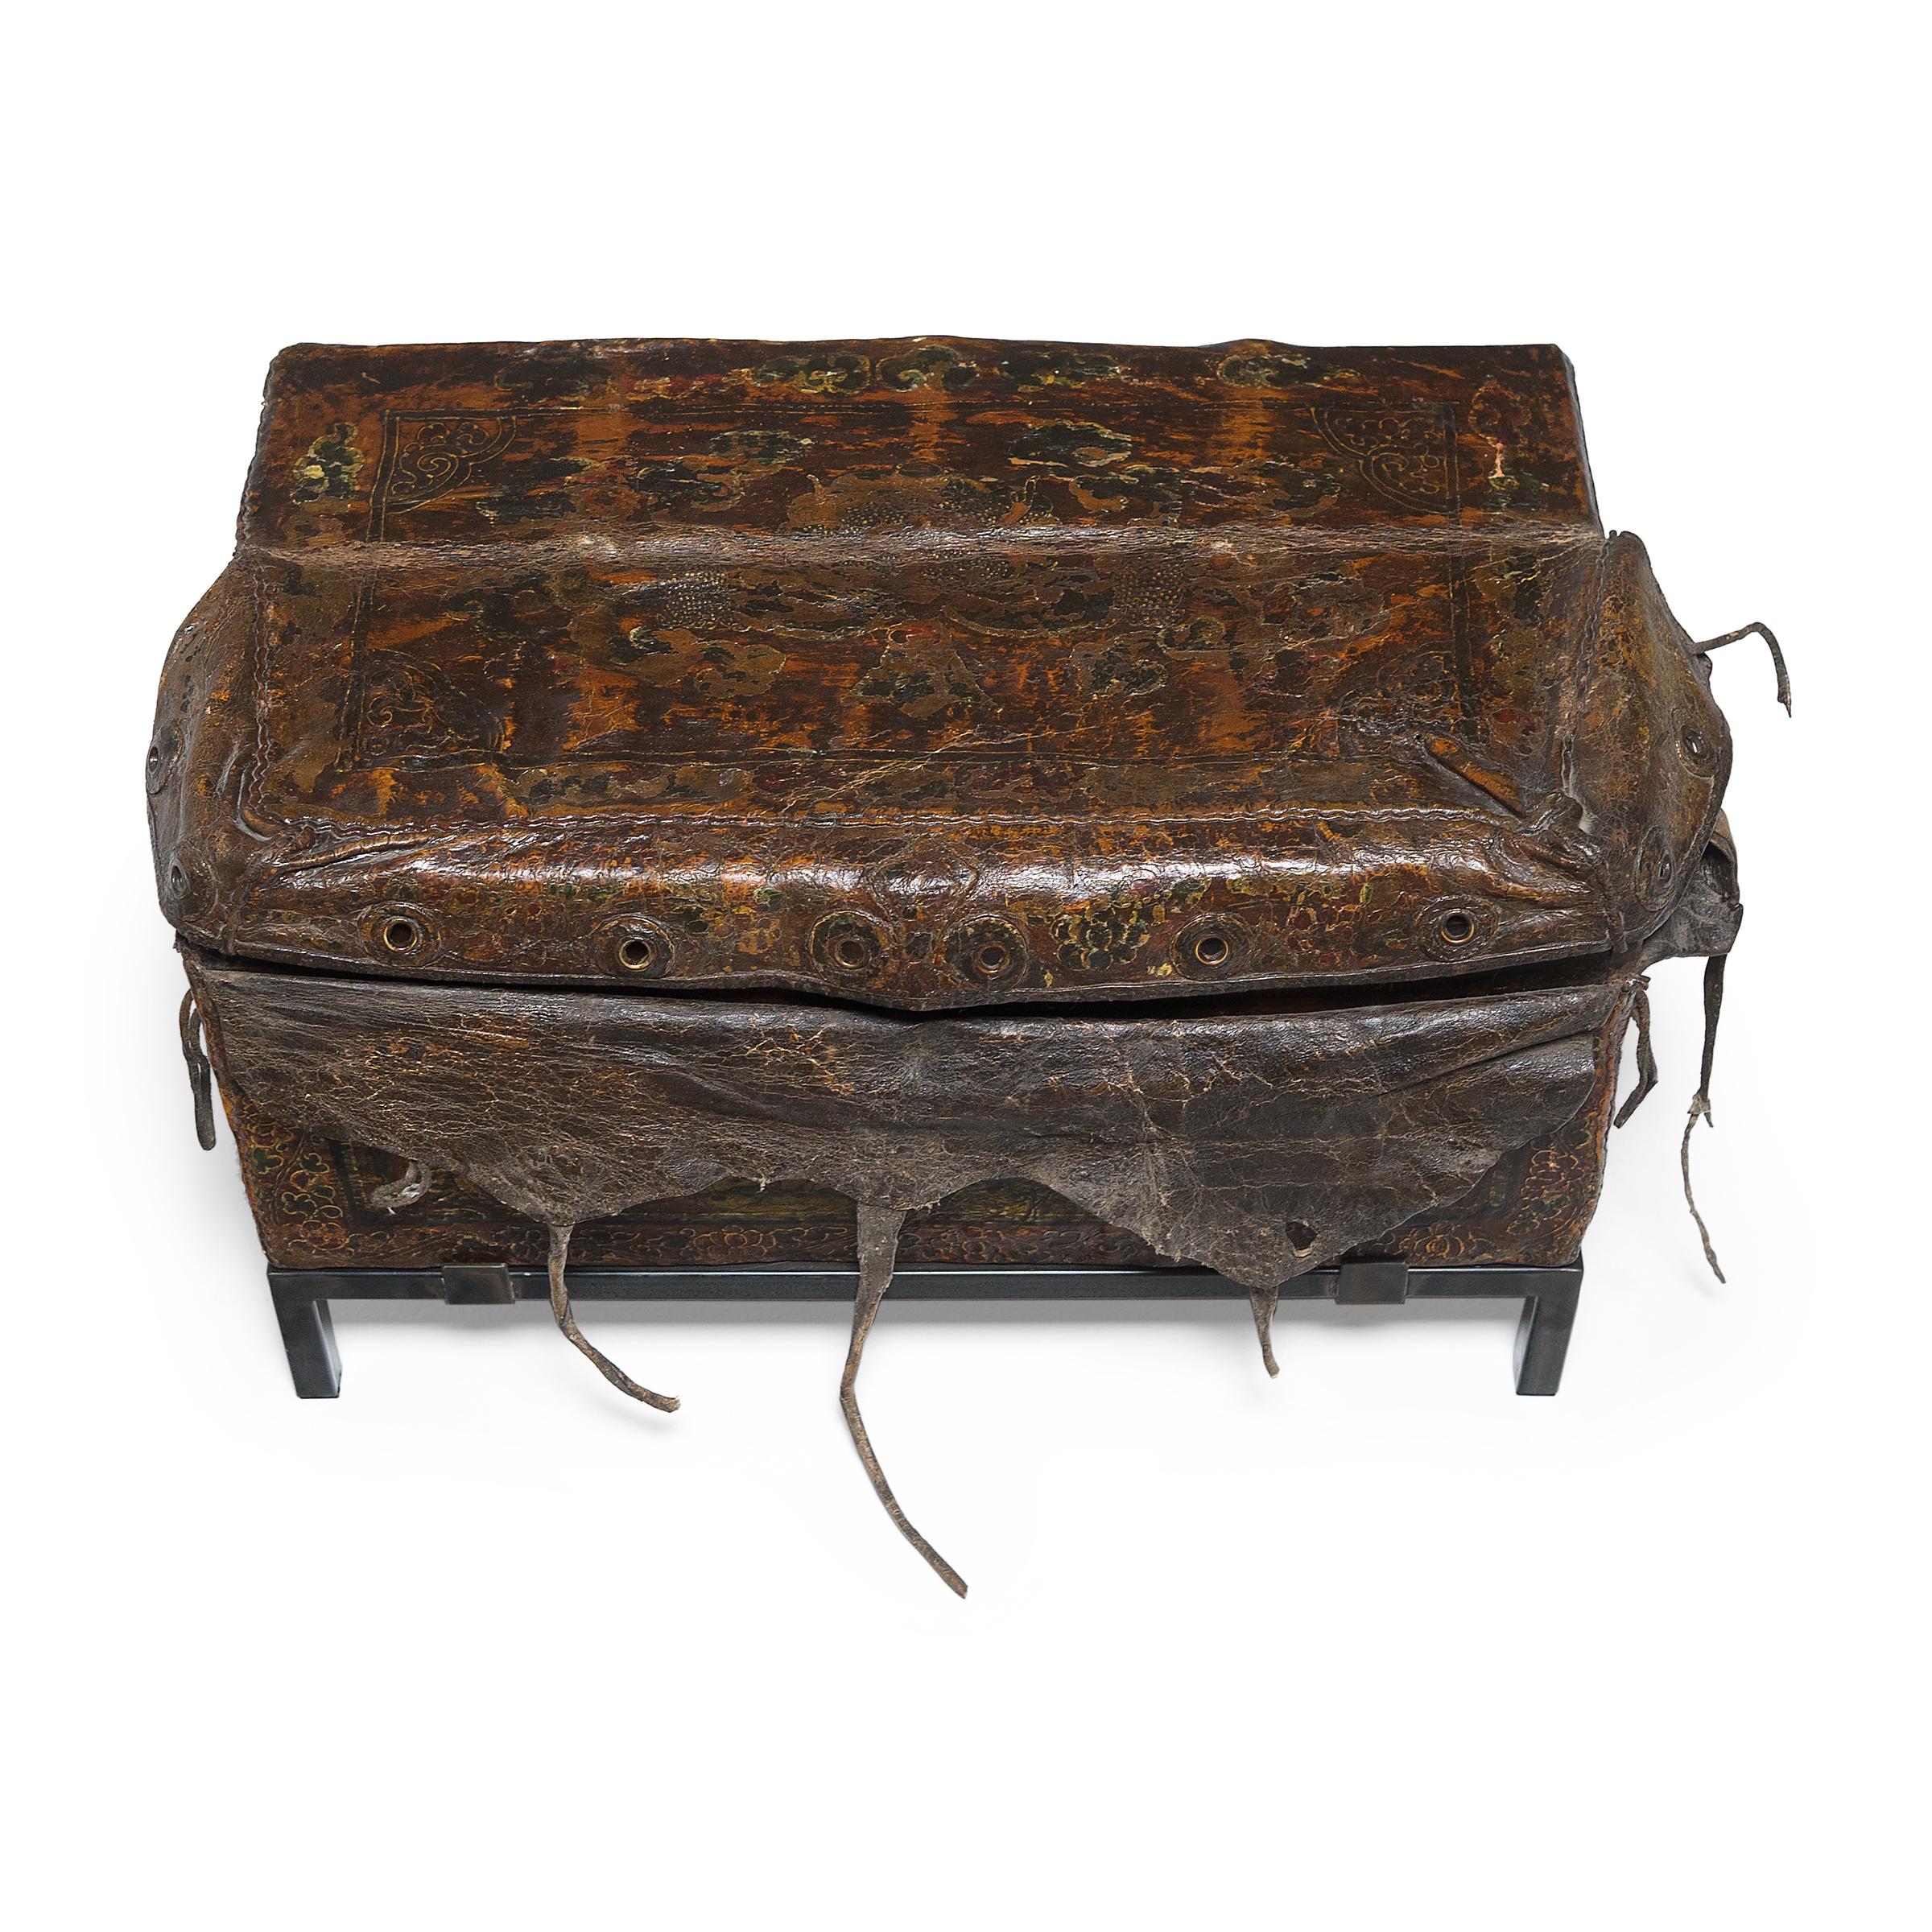 Tibetan Traveler's Trunk, C. 1850 In Good Condition For Sale In Chicago, IL